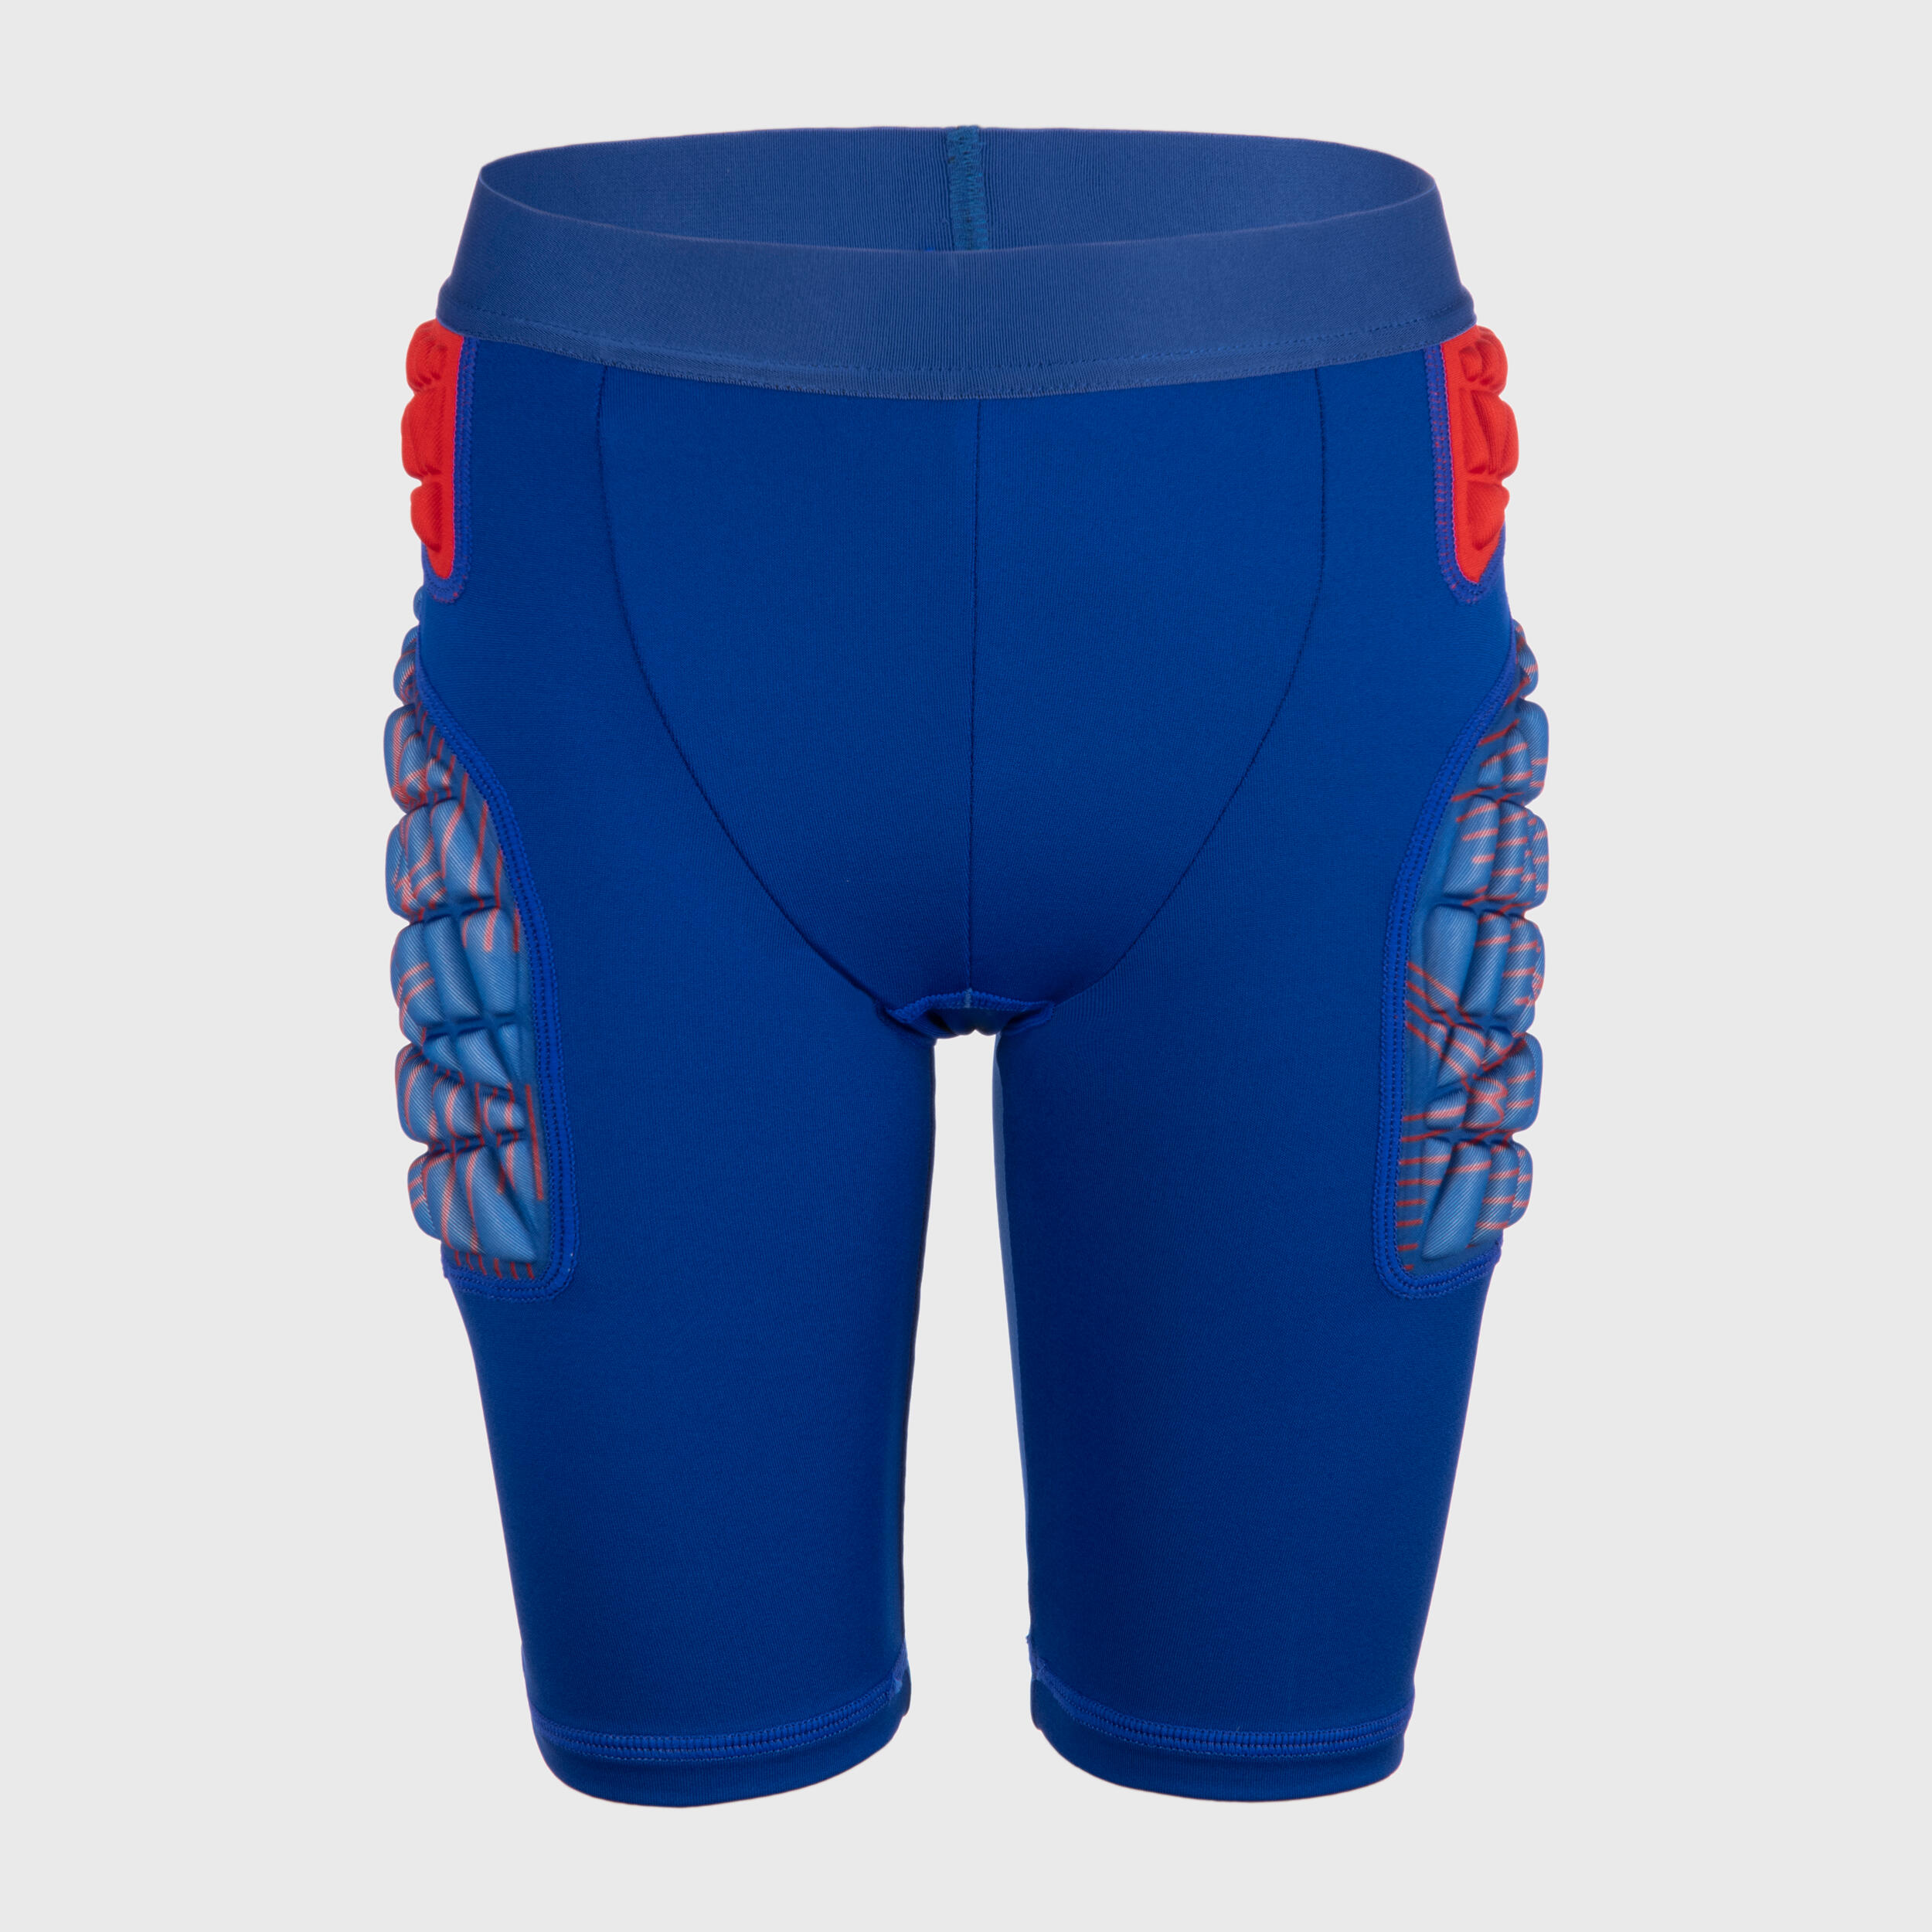 Kids' Protective Rugby Undershorts R500 - Blue/Red 2/7